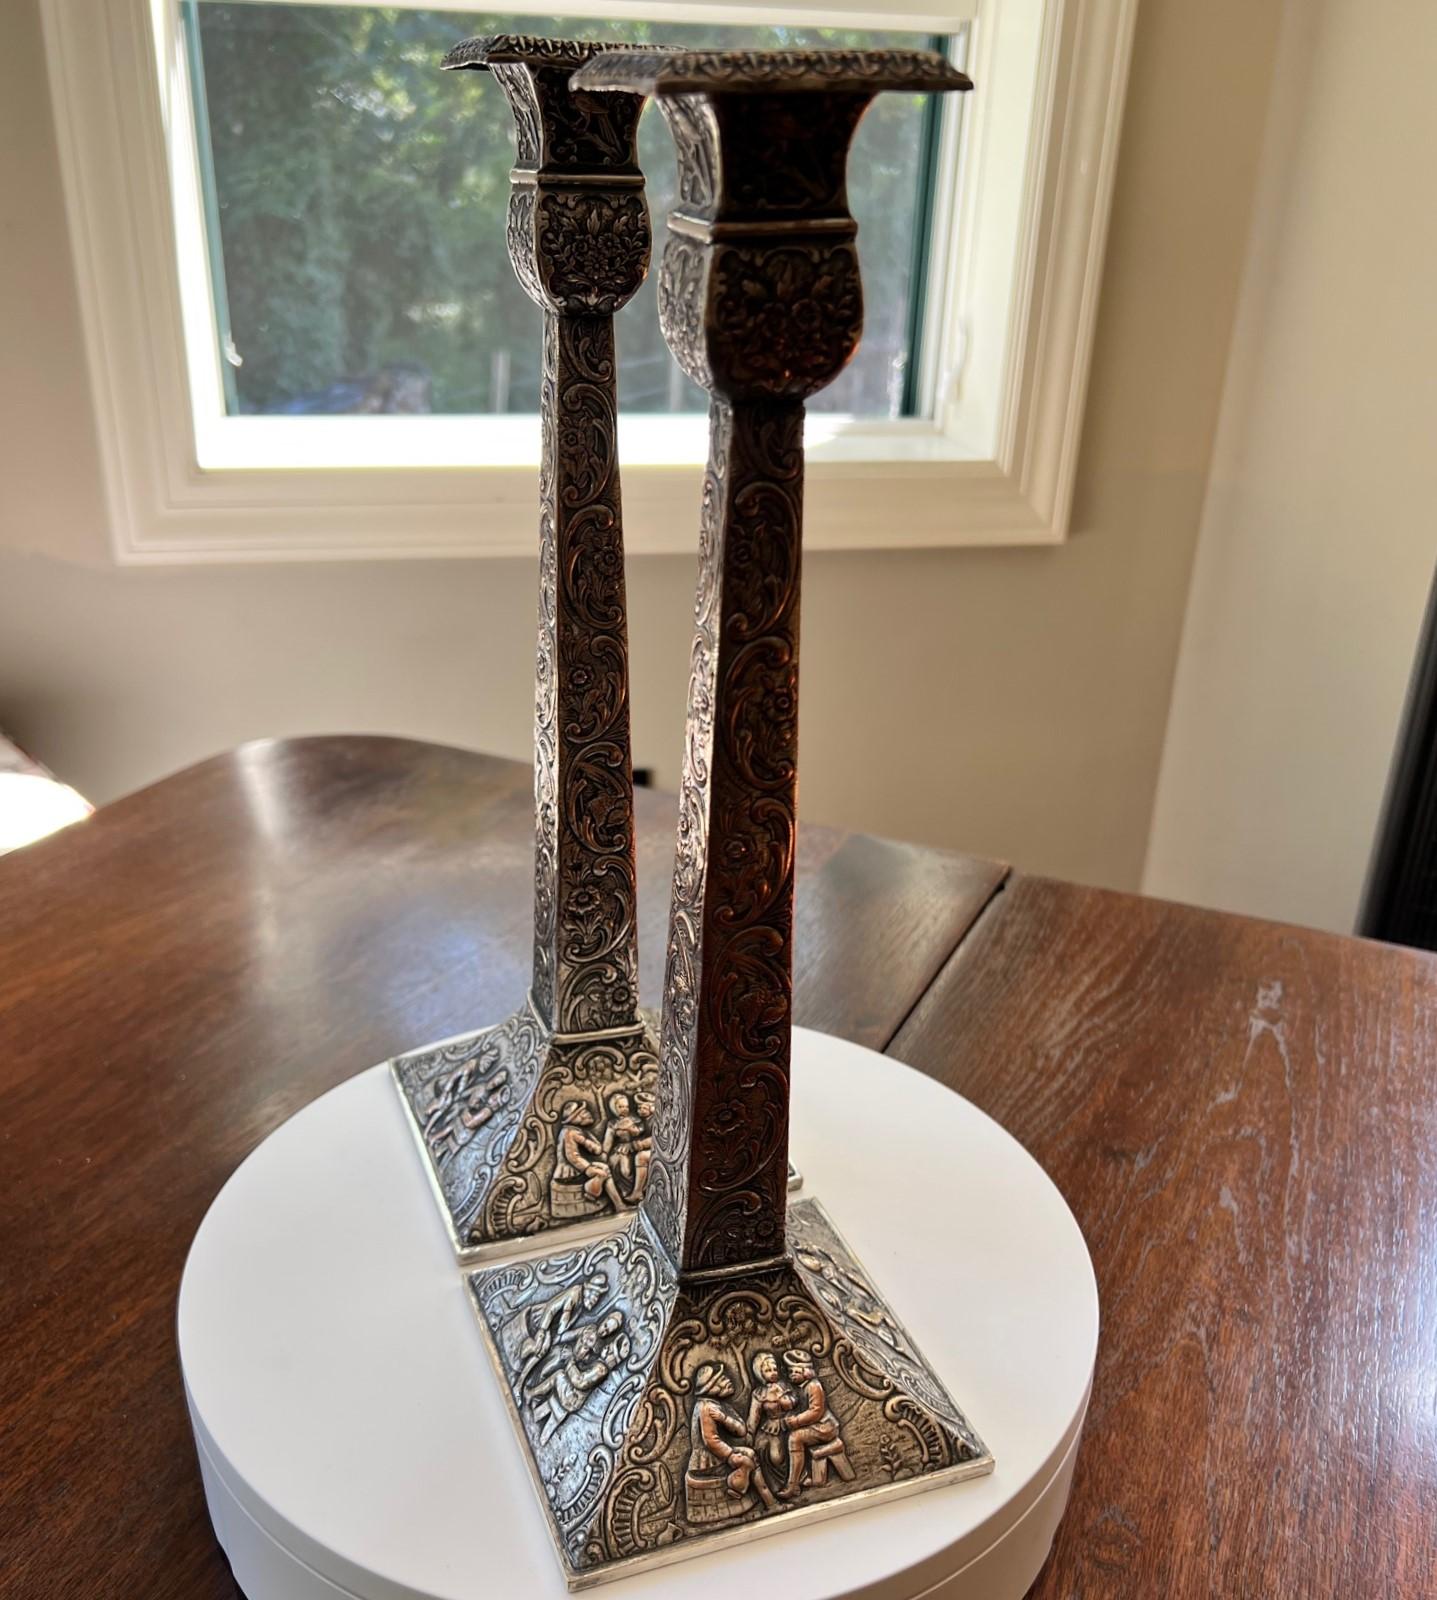 E.G. Webster and Sons silver plate repousse candlesticks, each with squared bobeche decorated with birds, over the floral standard, rising on a square base with Dutch tavern scenes, marked underfoot.

Dimensions:
13.5